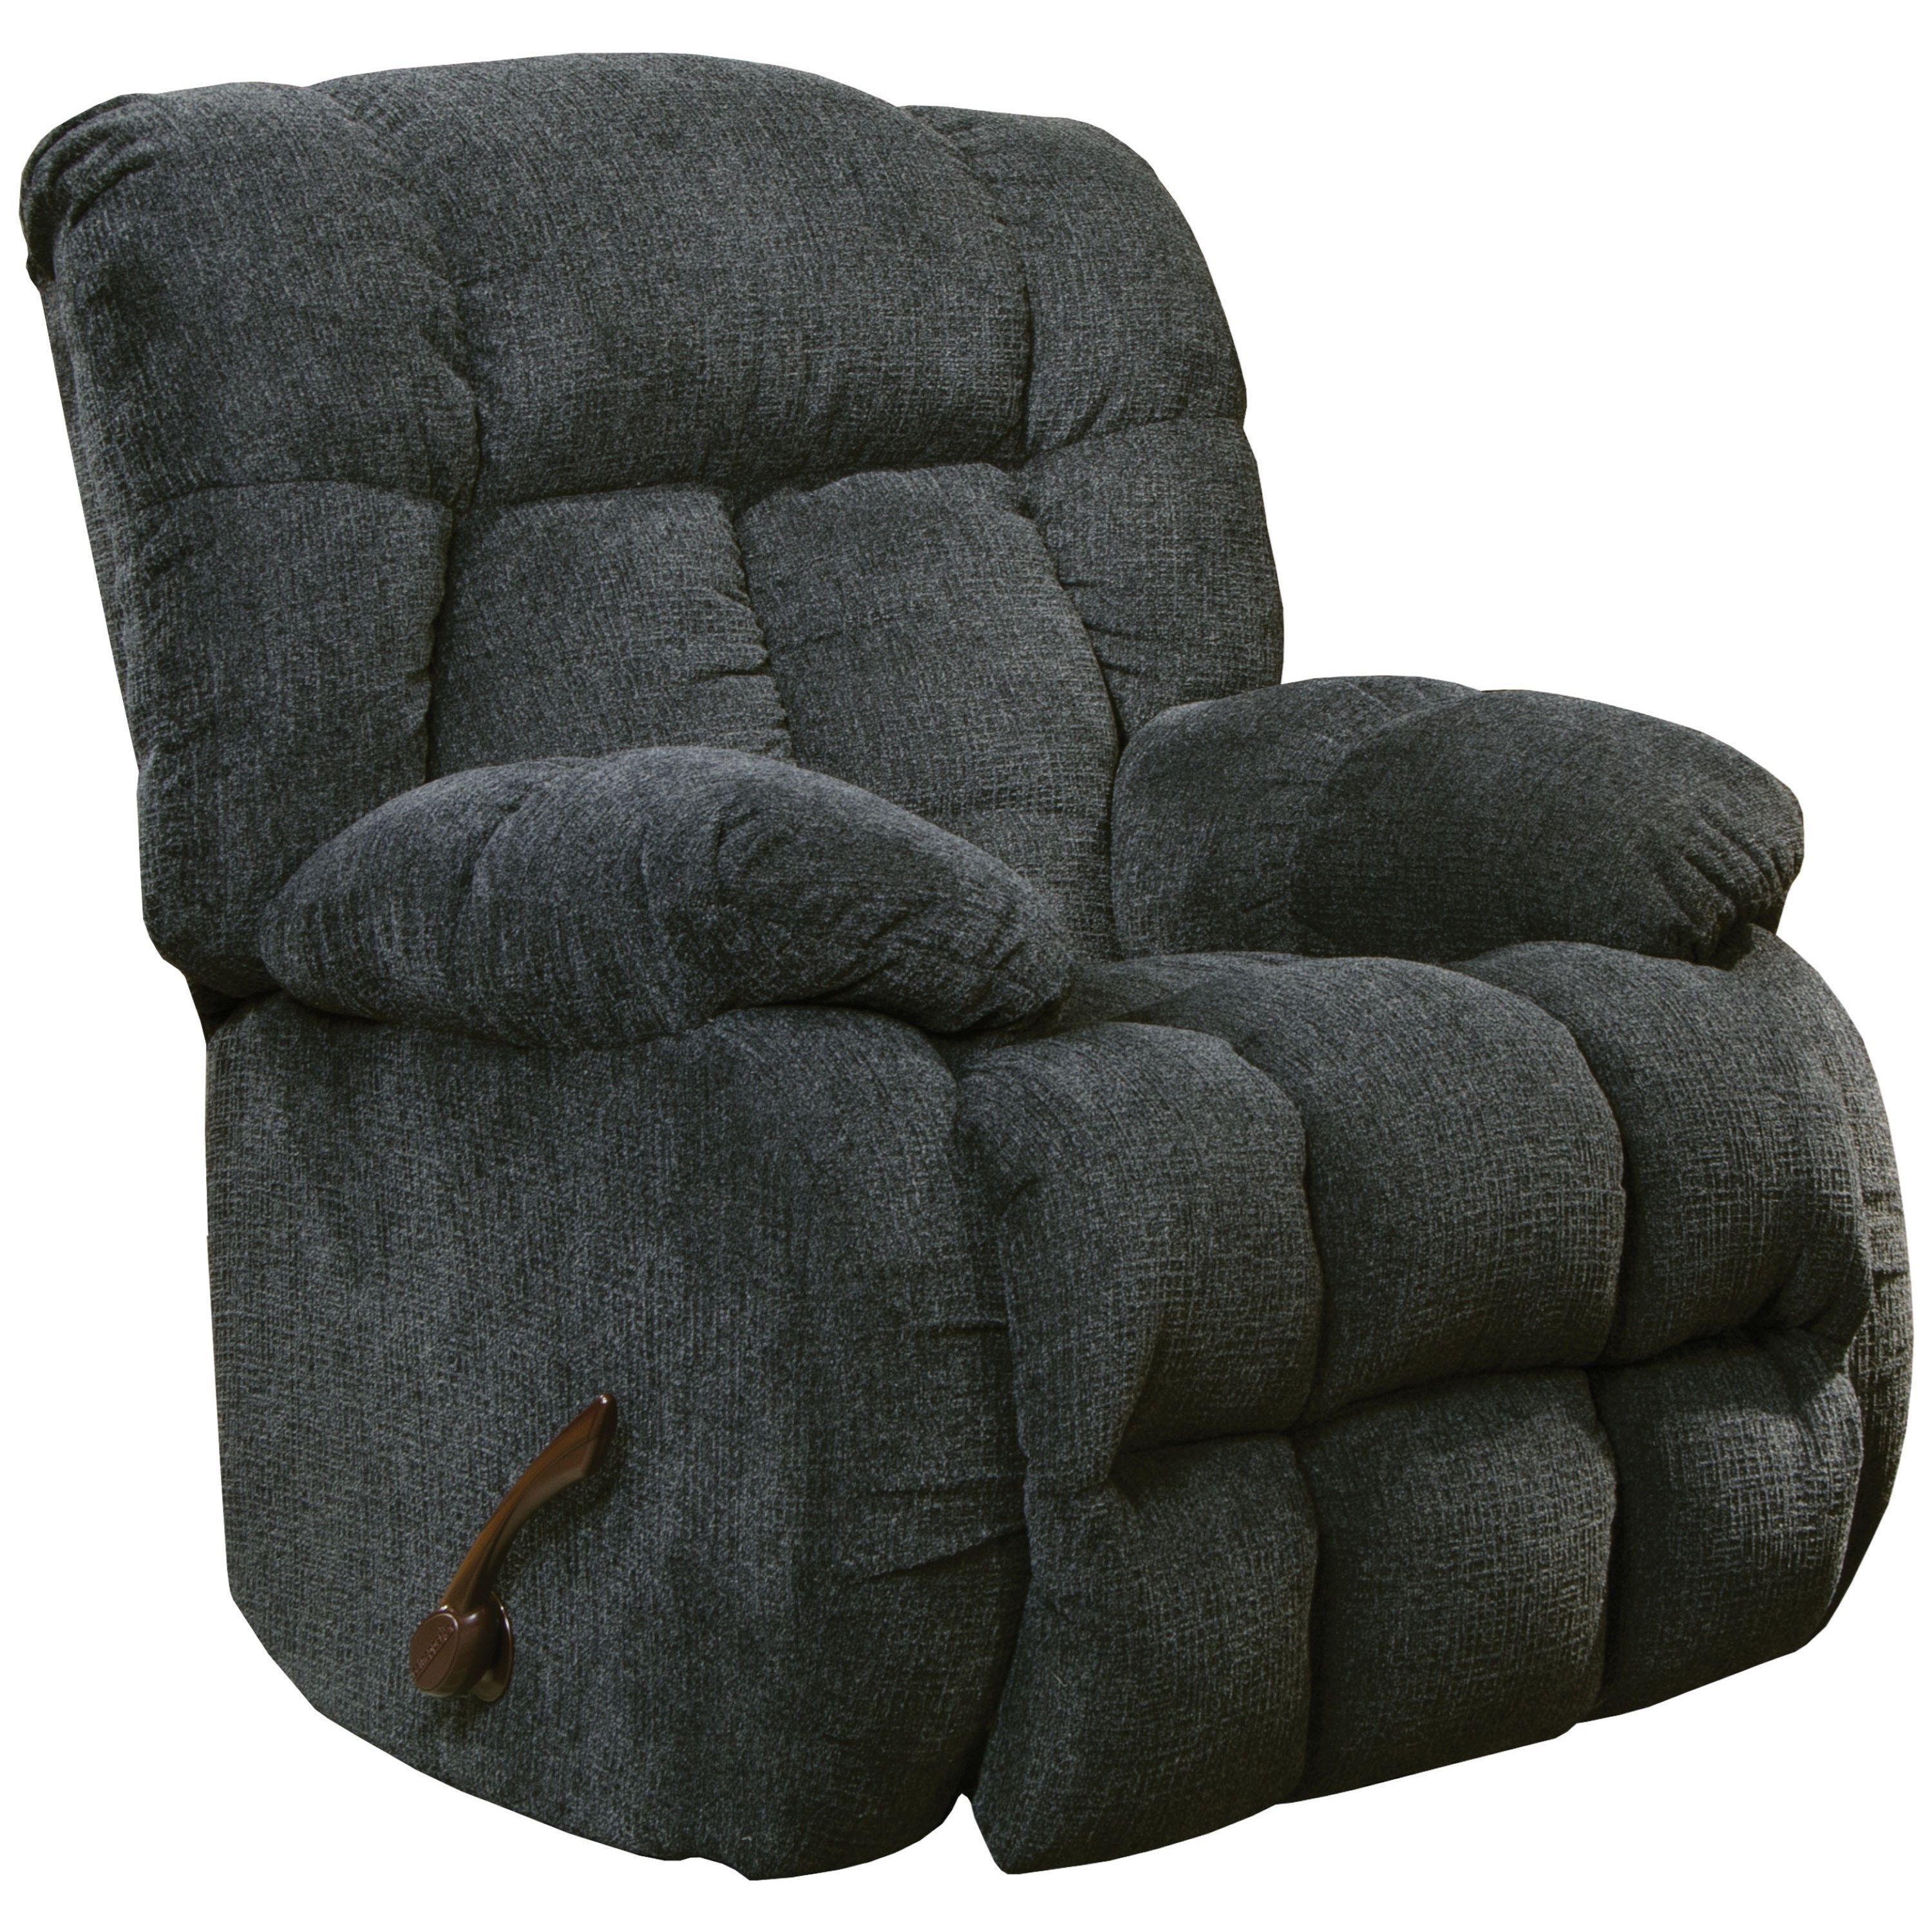 Catnapper Motion Chairs And Recliners 4774 2 Brody Rocker Recliner Regarding Gibson Swivel Cuddler Chairs (View 14 of 20)